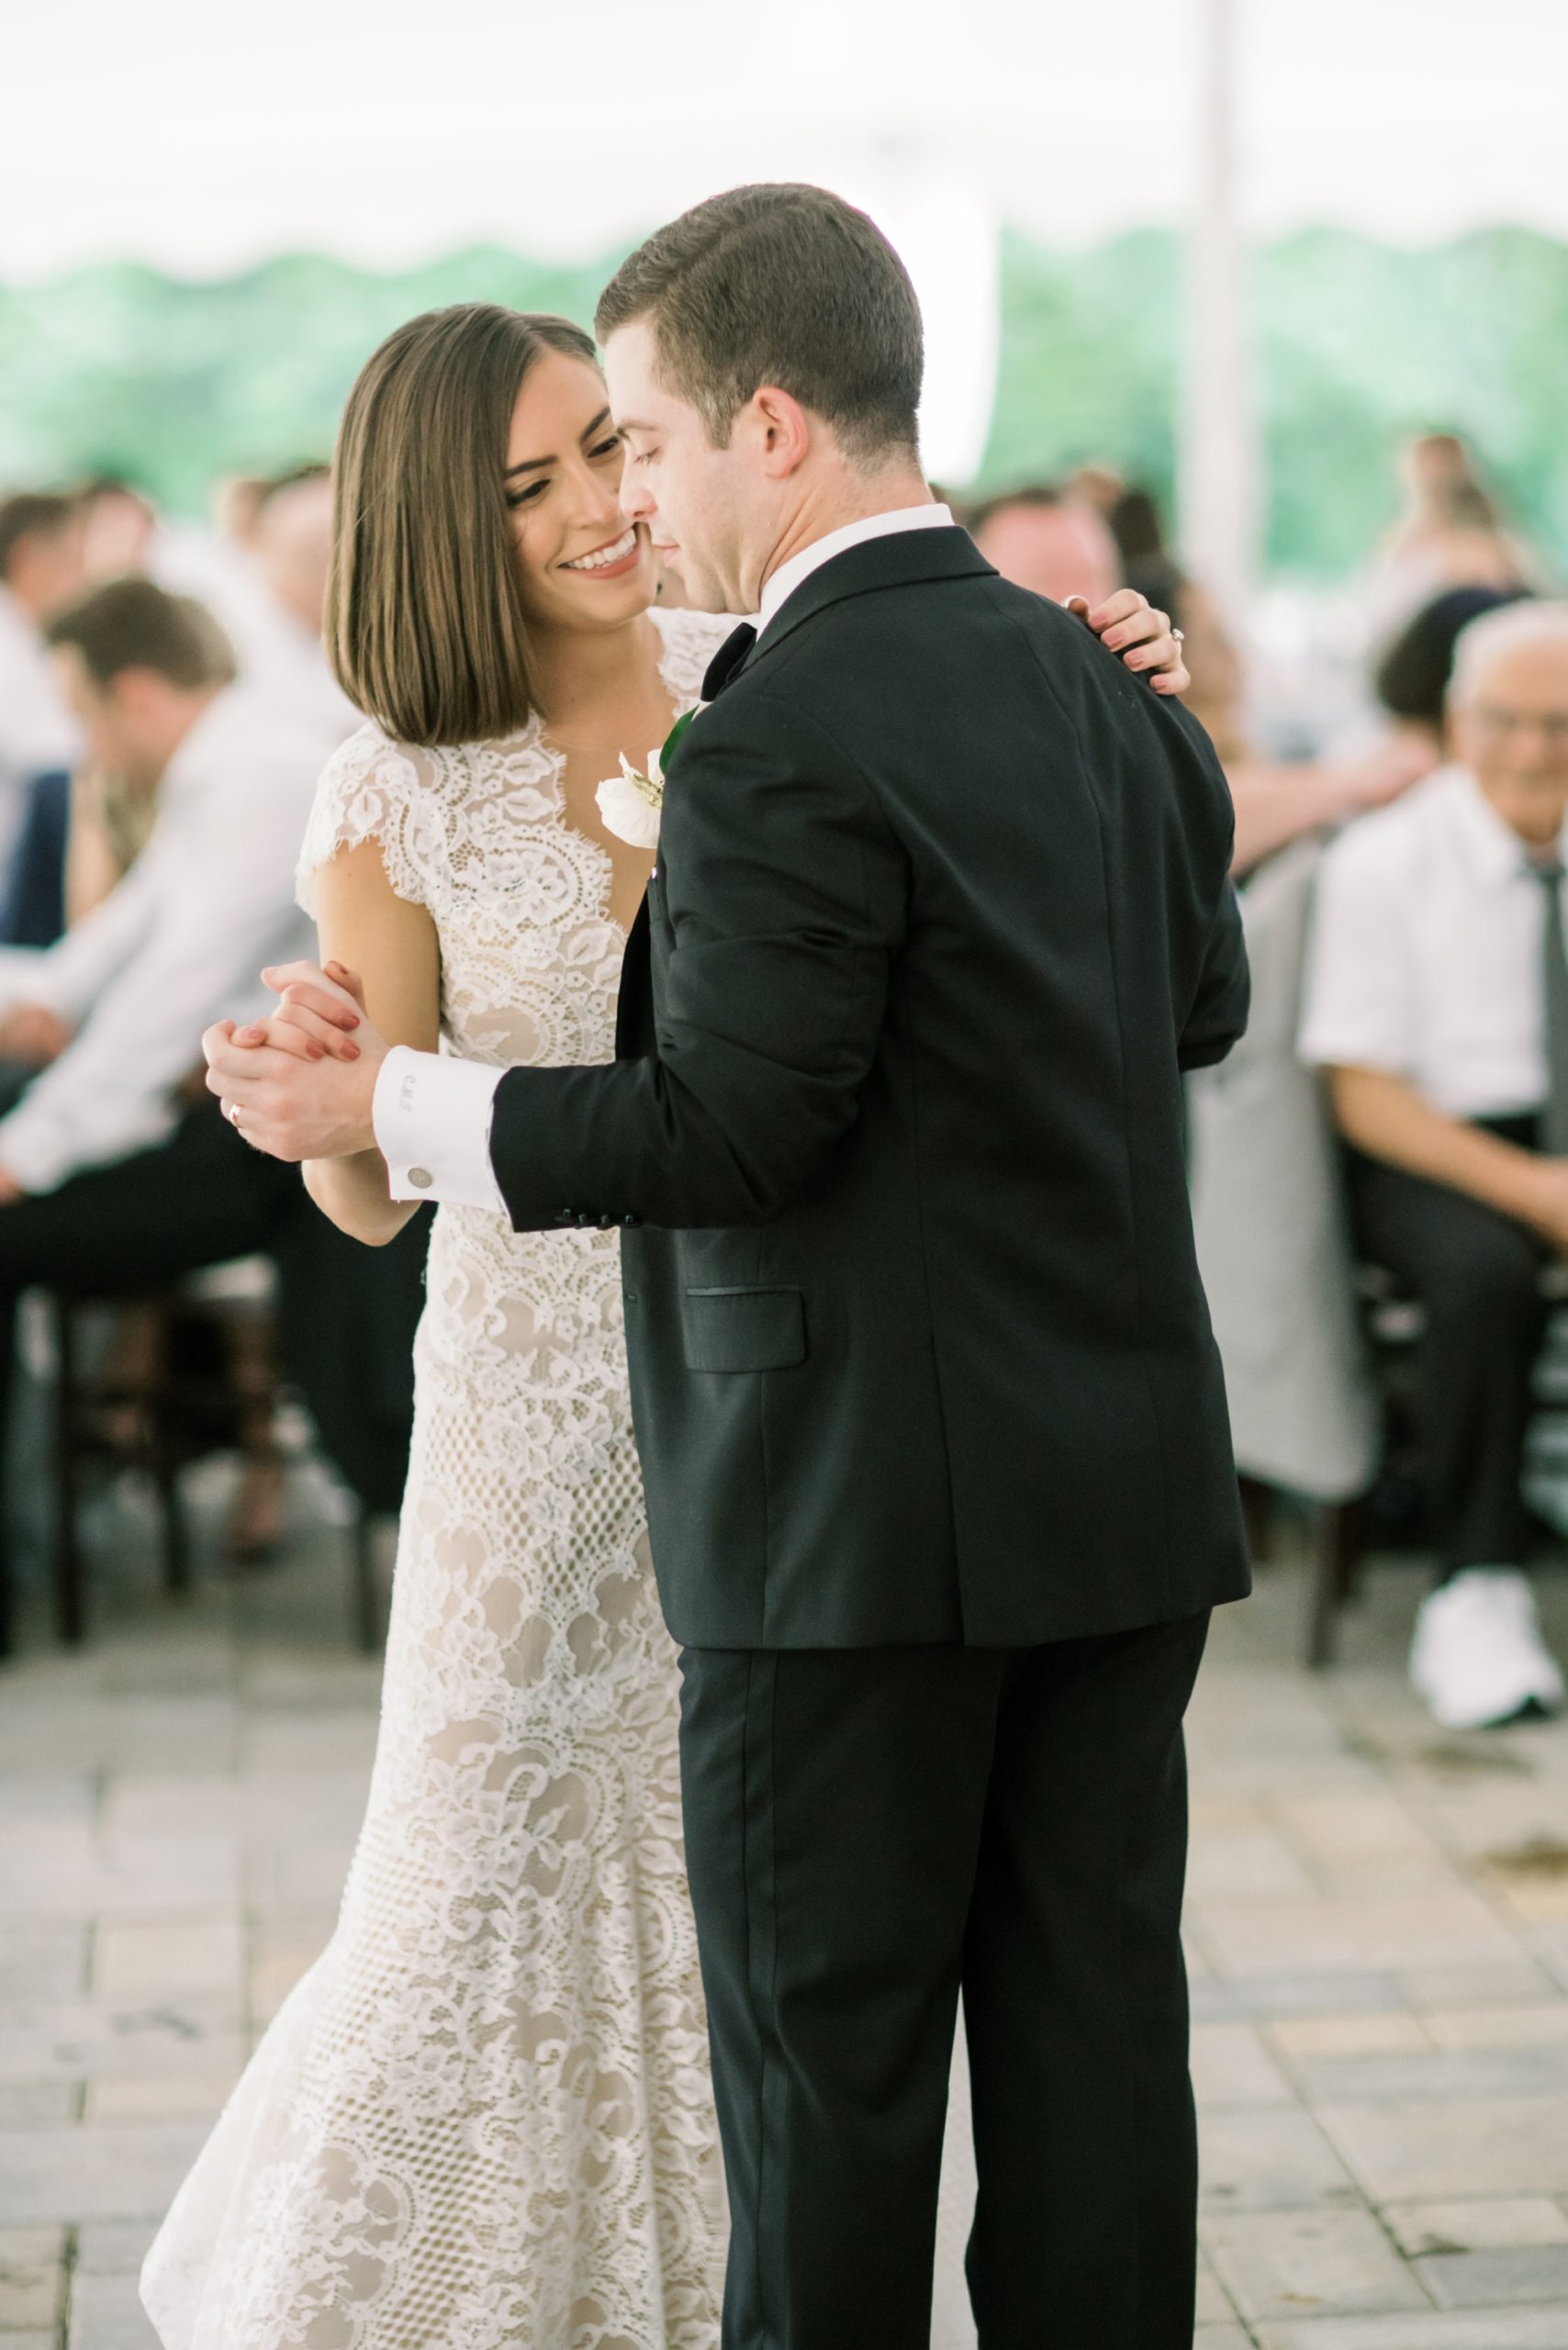 the couple shared a sweet first dance